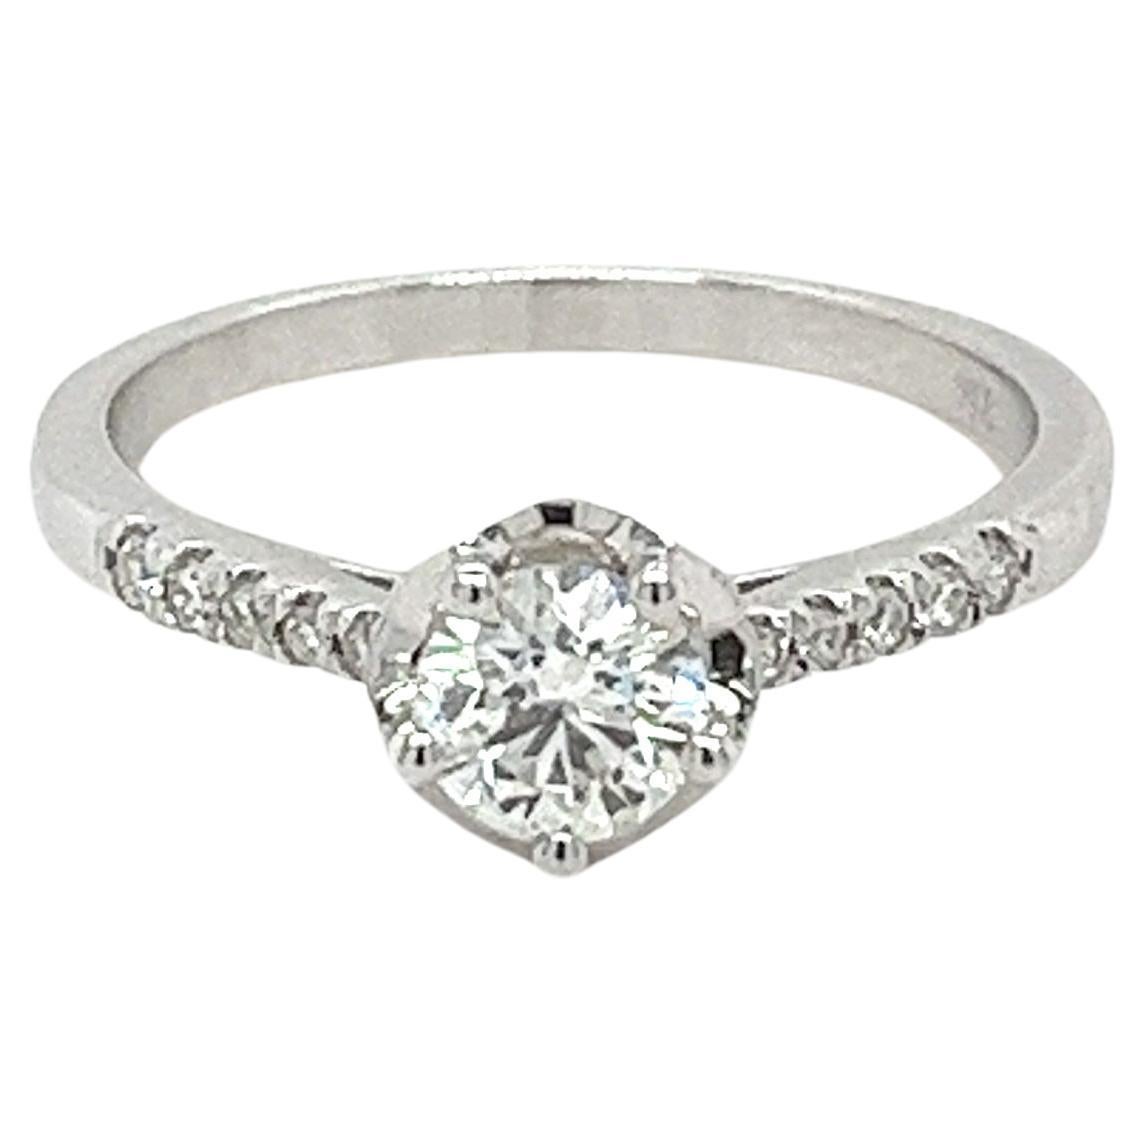 0.44CTTW Natural Diamond Engagement Ring with Vintage Halo & Diamond Sides 